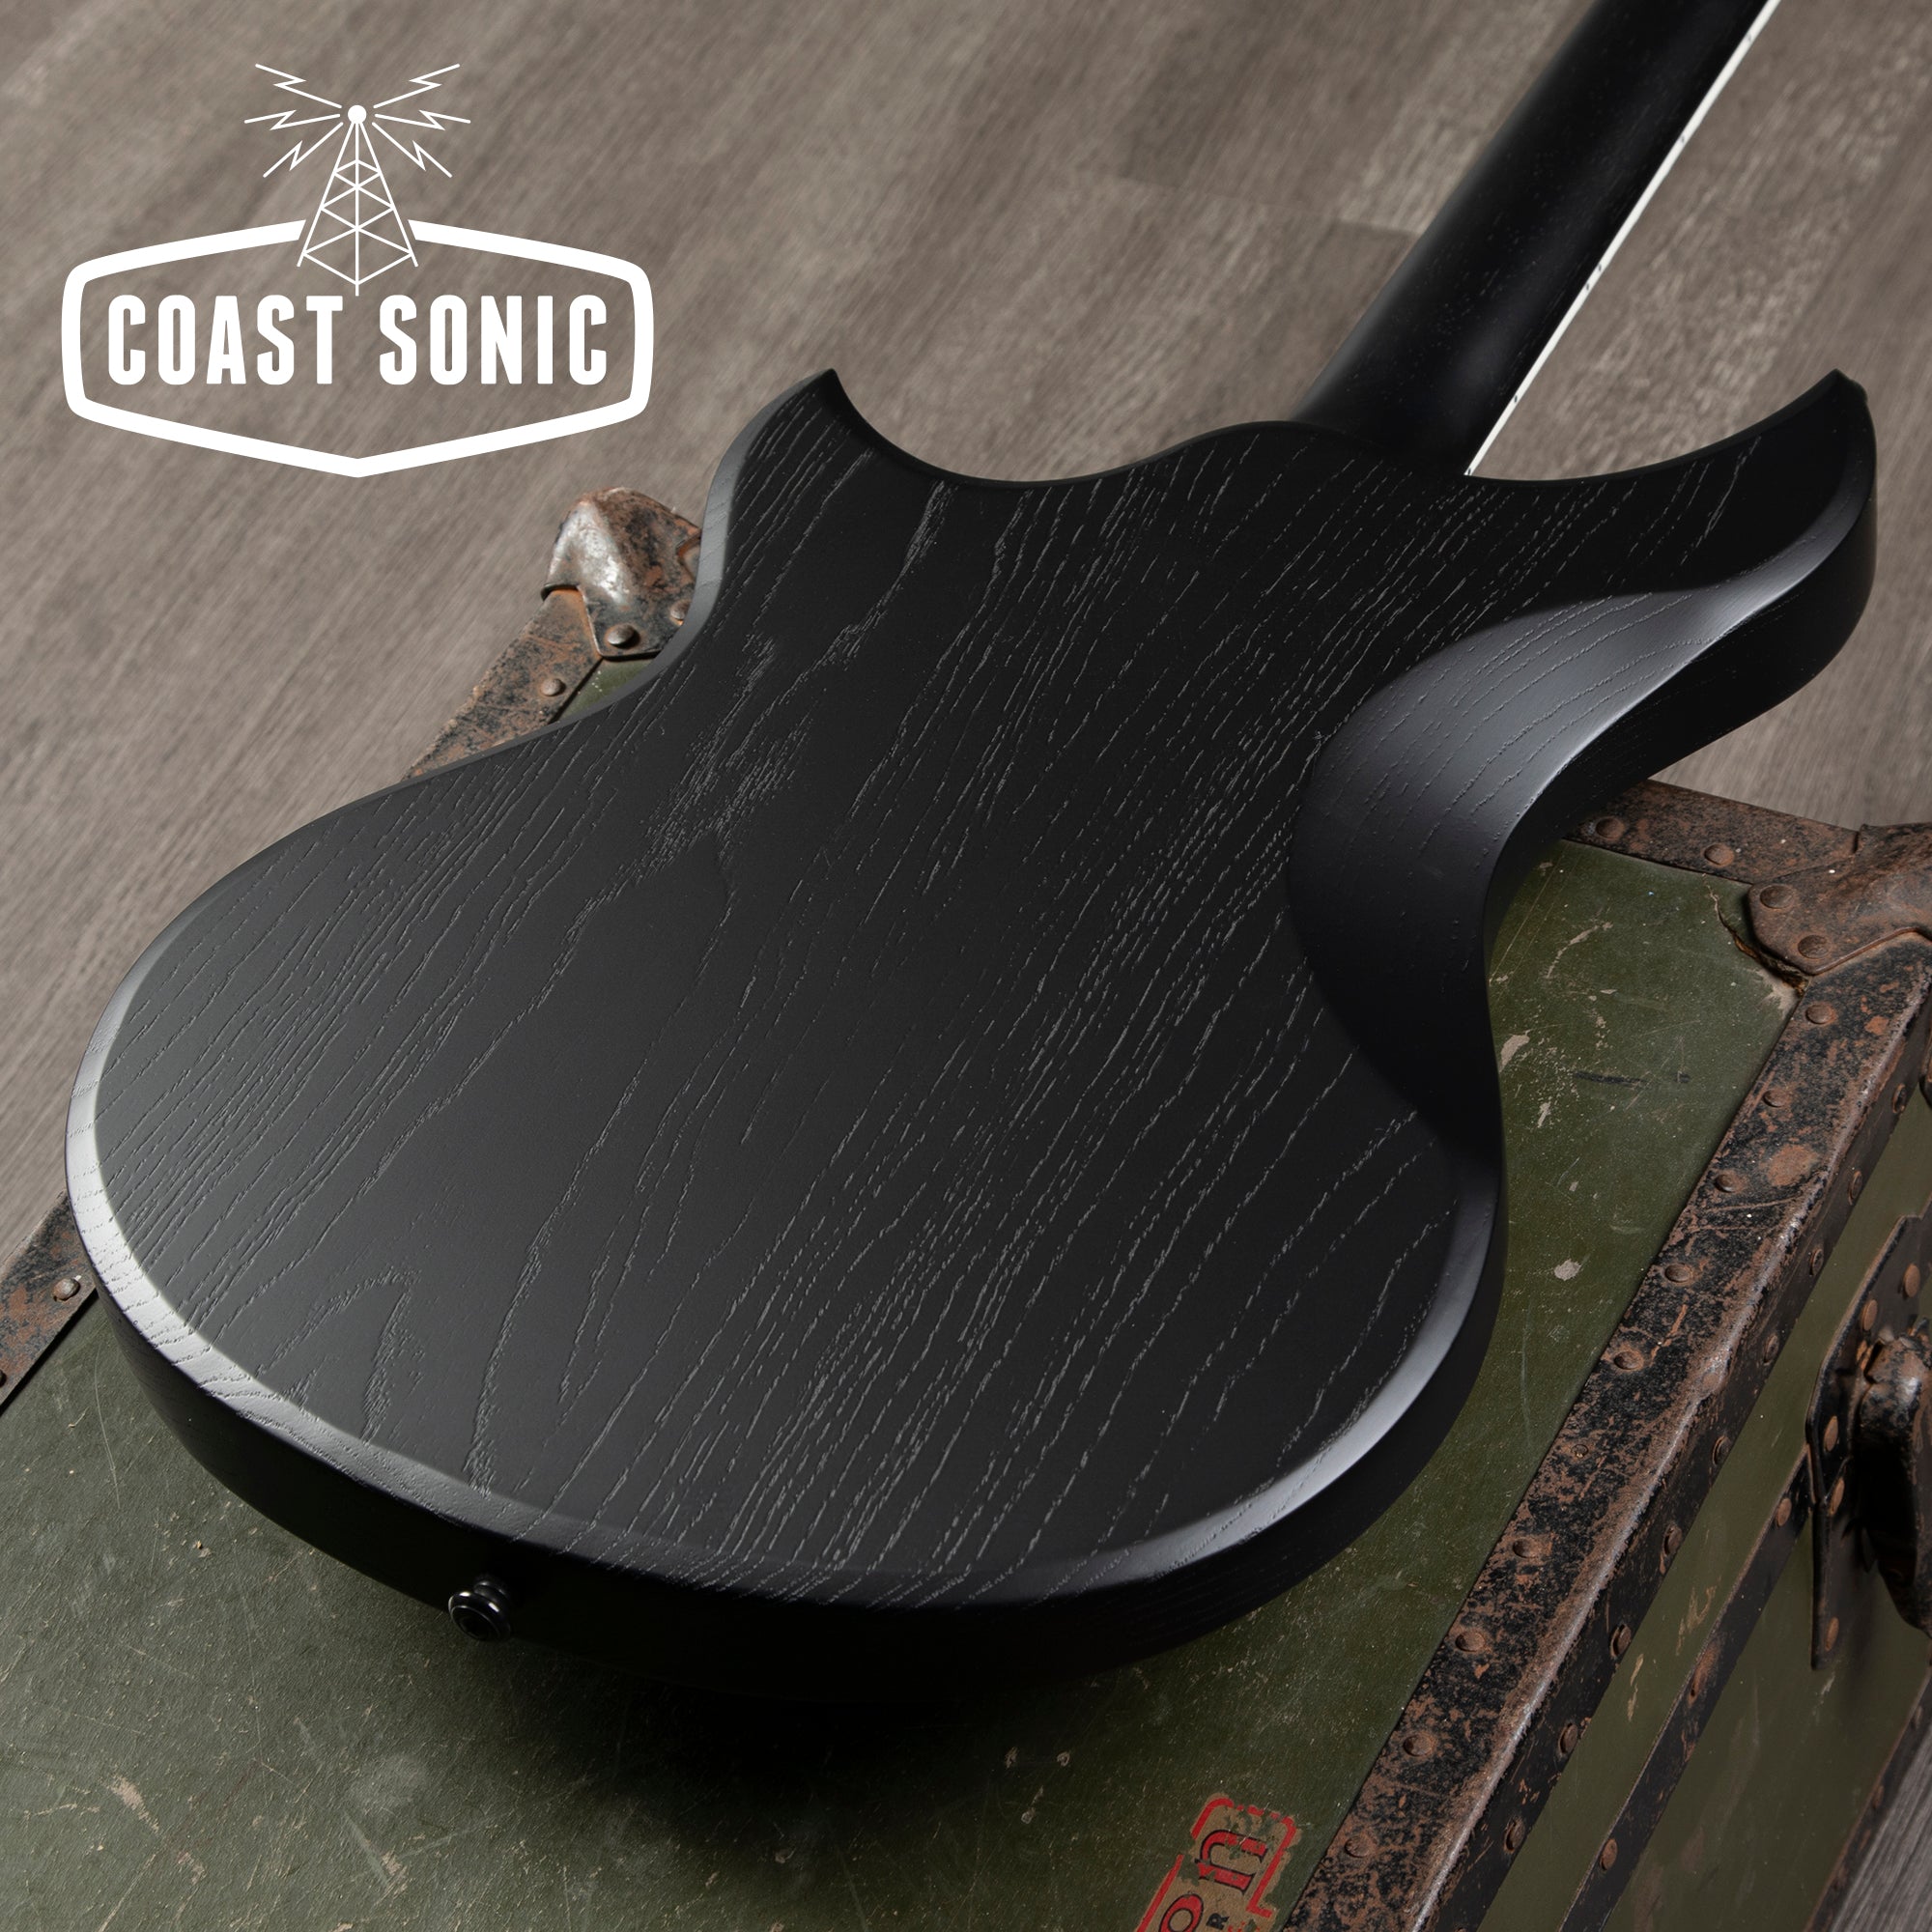 Dunable Guitars Cyclops DE V2 - Limited edition blacked out Ash